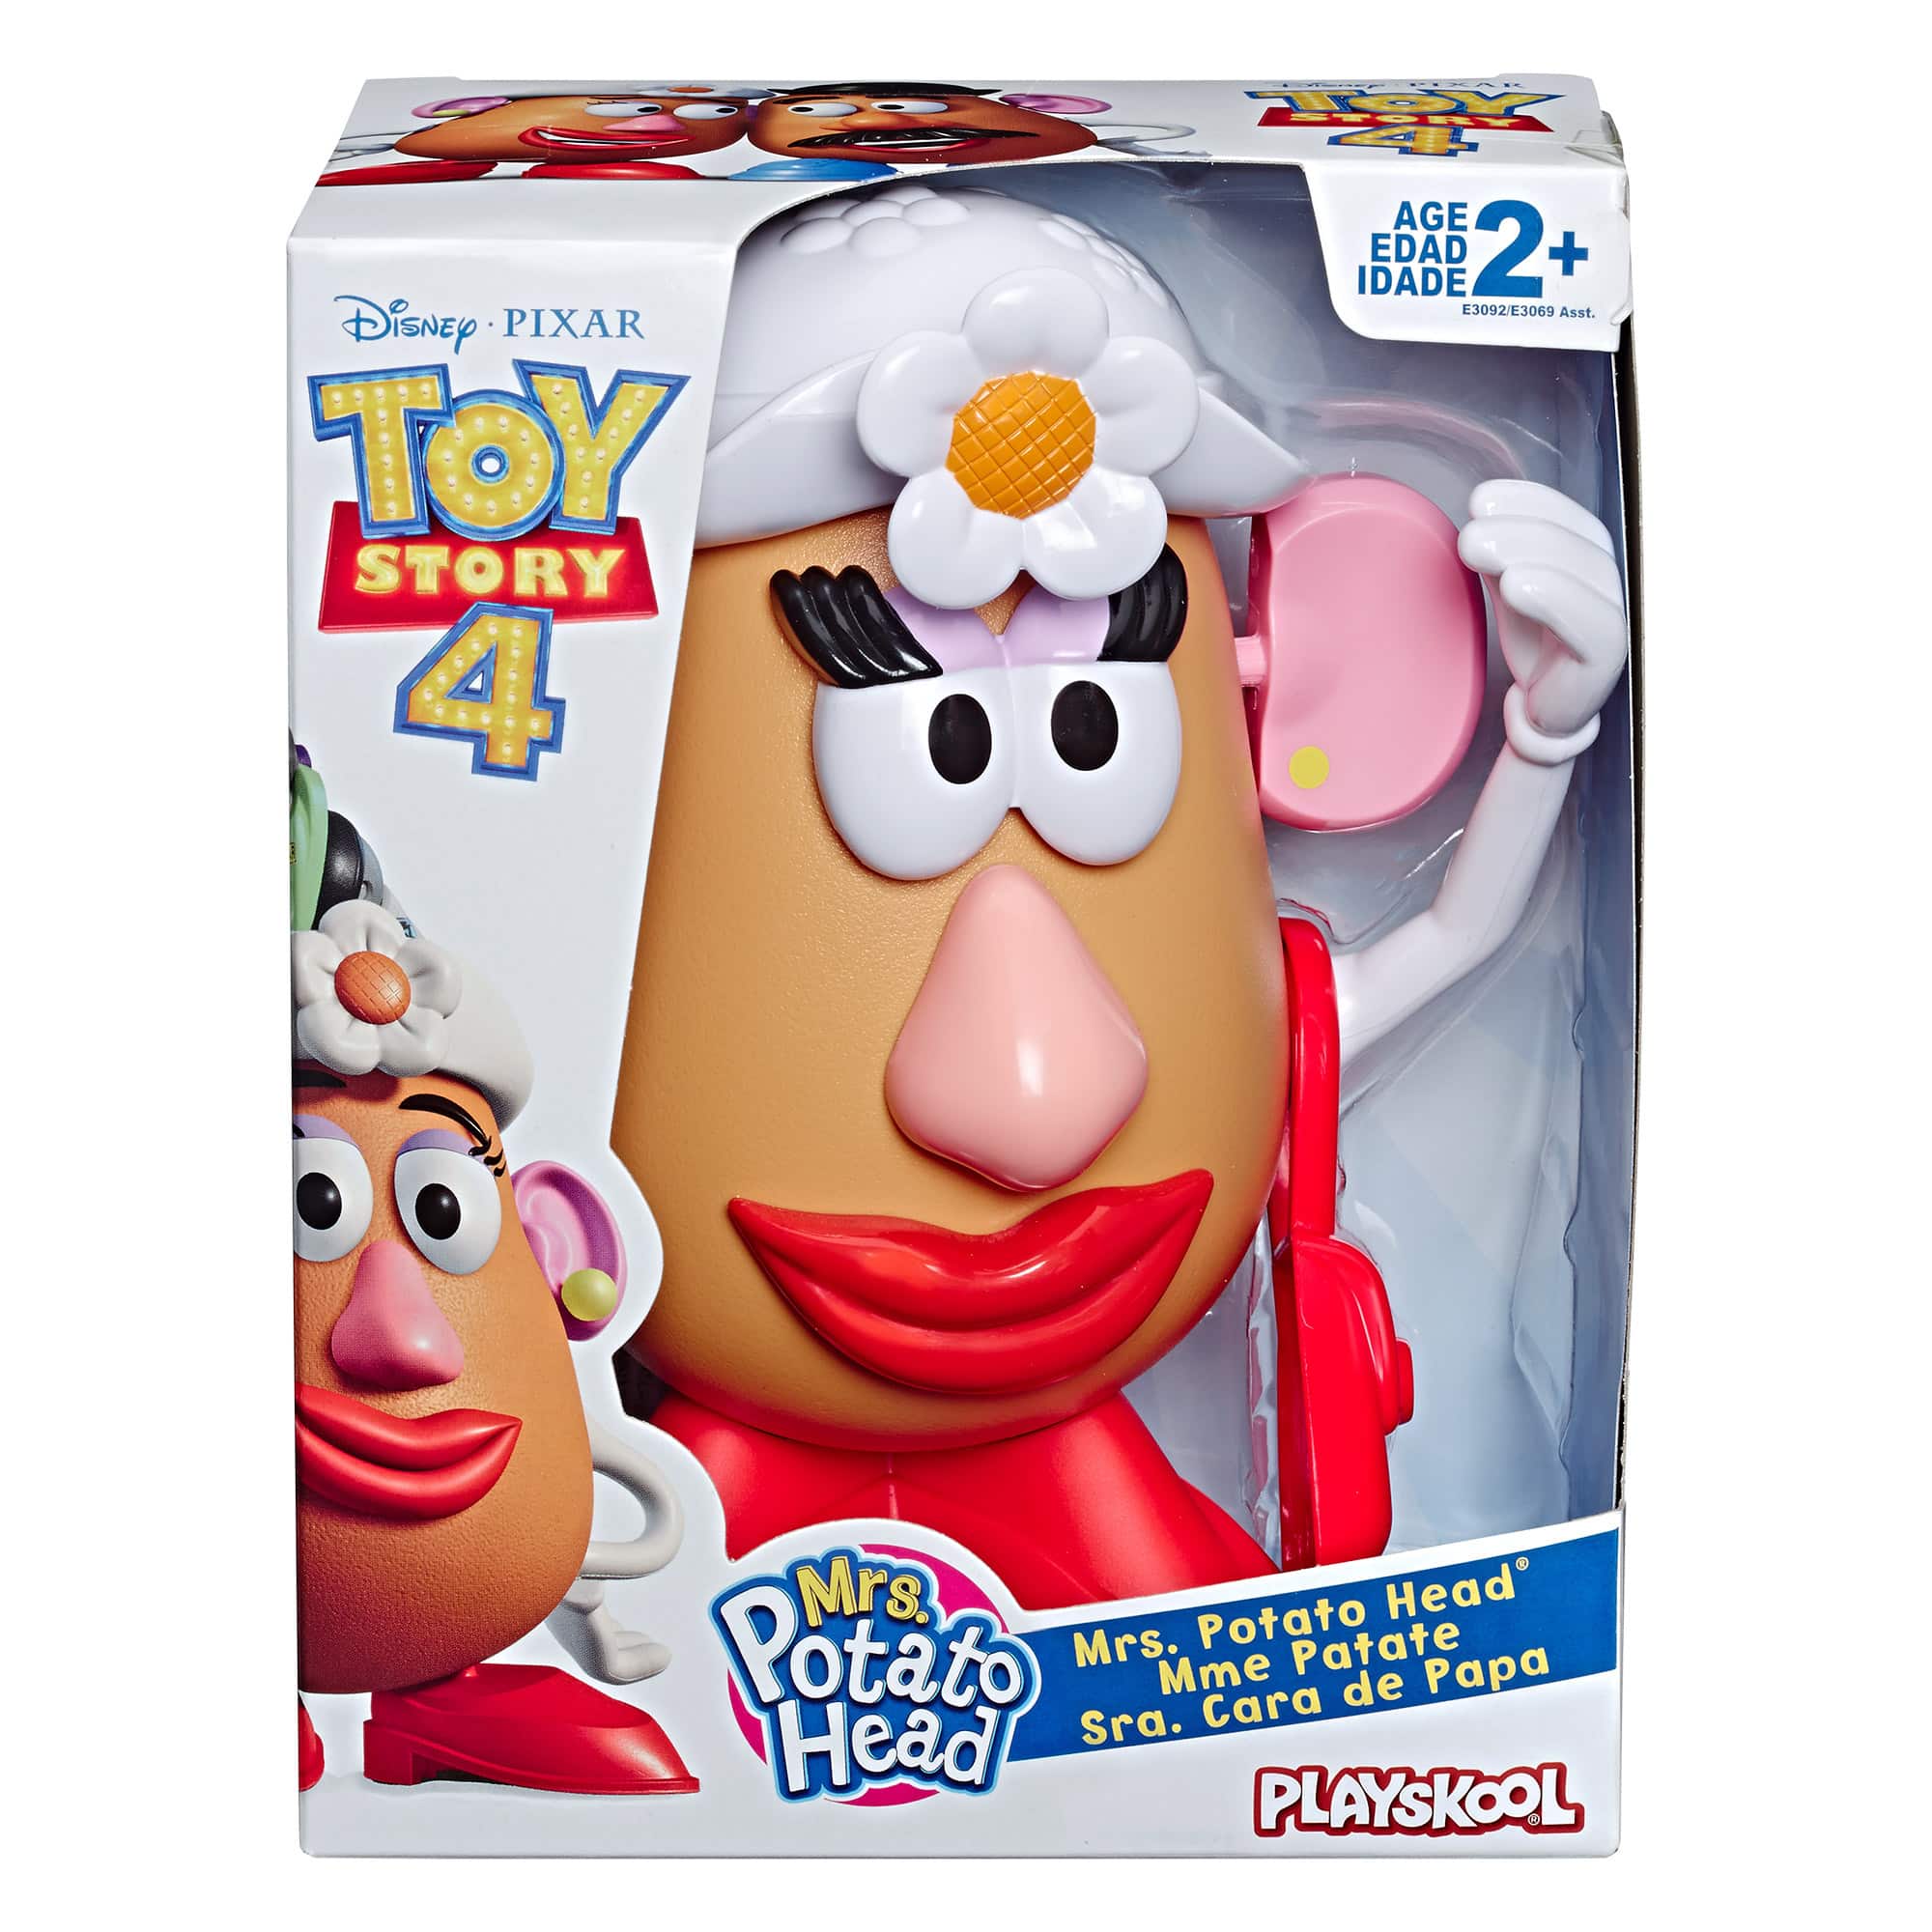 Potato Head Disney/Pixar Toy Story 4 Classic Mrs Mrs Figure Toy For Kids Ages 2 & Up 